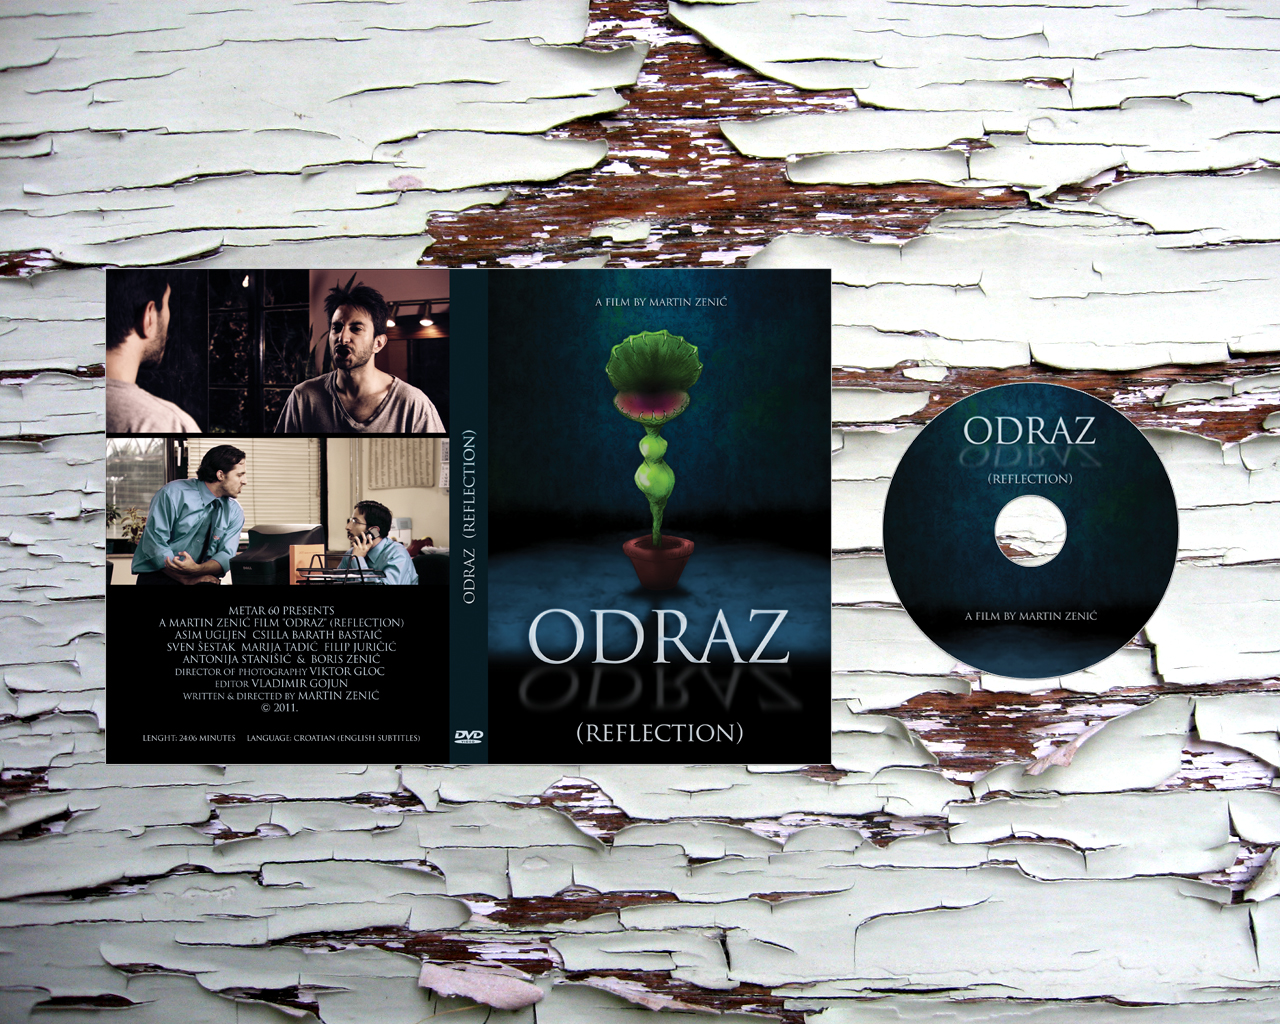 Odraz (Reflection) DVDcover by cilic